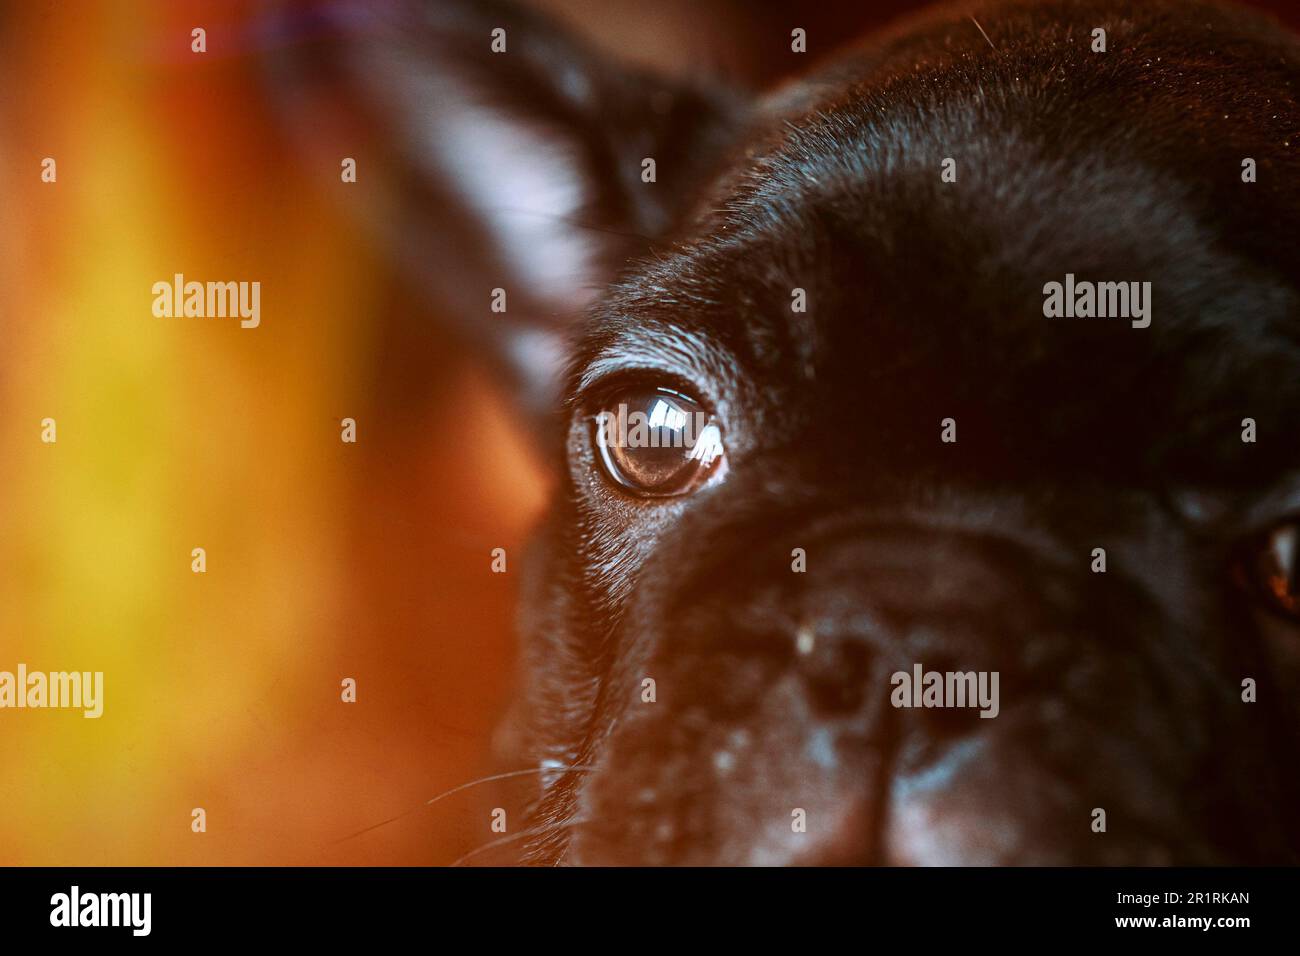 Close Up Eye Of Young Black French Bulldog Dog Puppy In Soft Sunlight. Funny Puppy Dog. Black Dog. Stock Photo